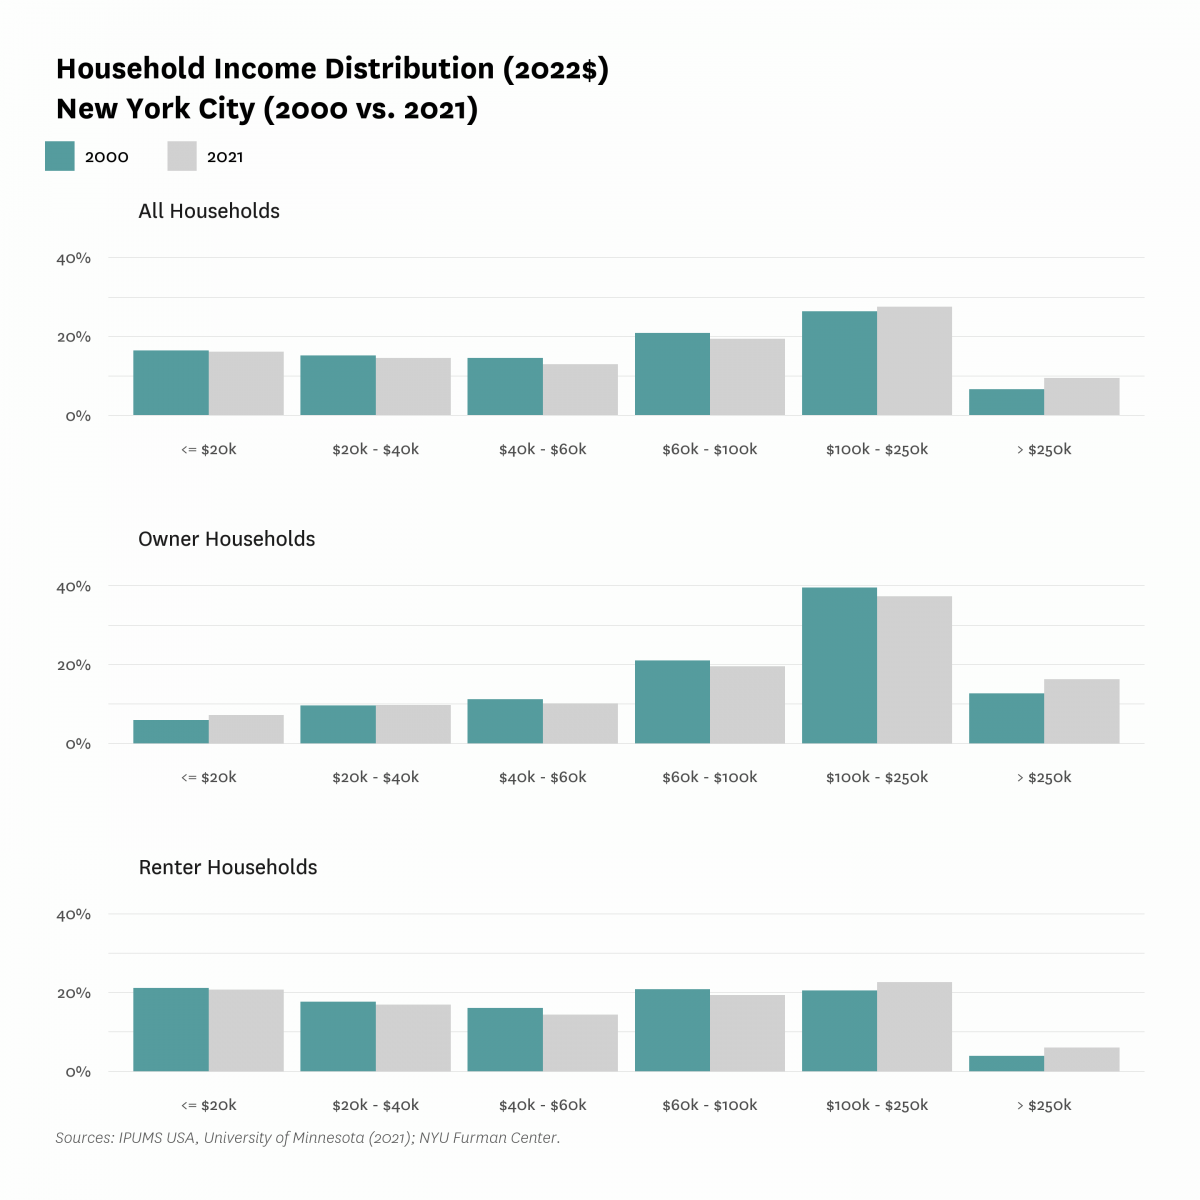 Bar graphs comparing the Household Income Distribution in New York City in 2000 and 2021, for all households, owner households, and renter households.